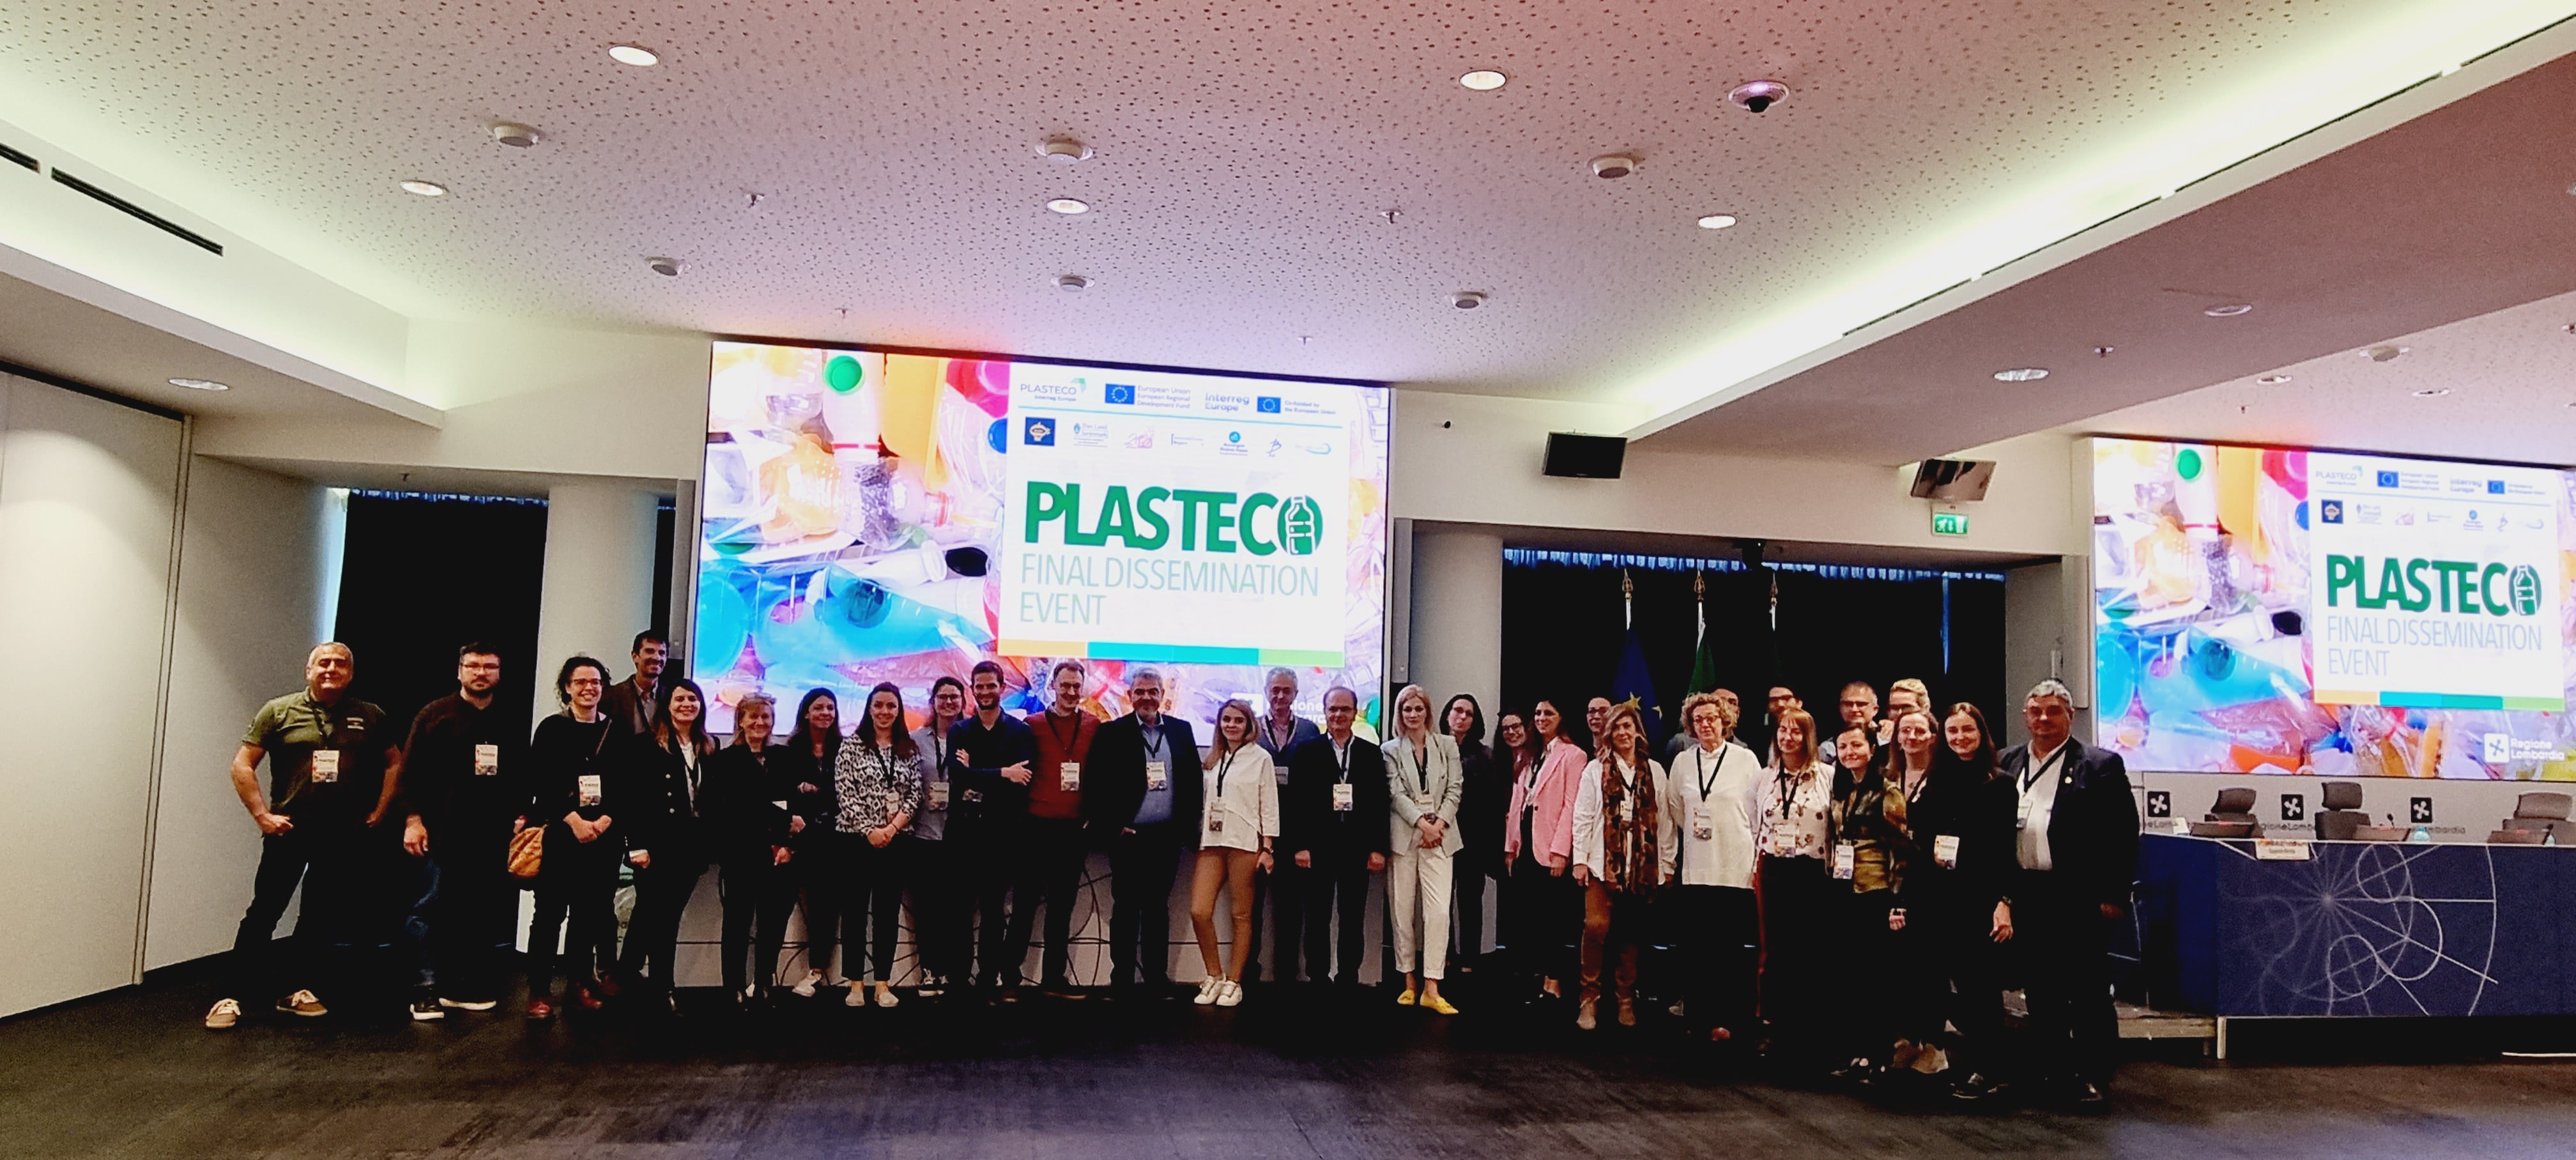 PLASTECO held its Final Dissemination Event in Milan